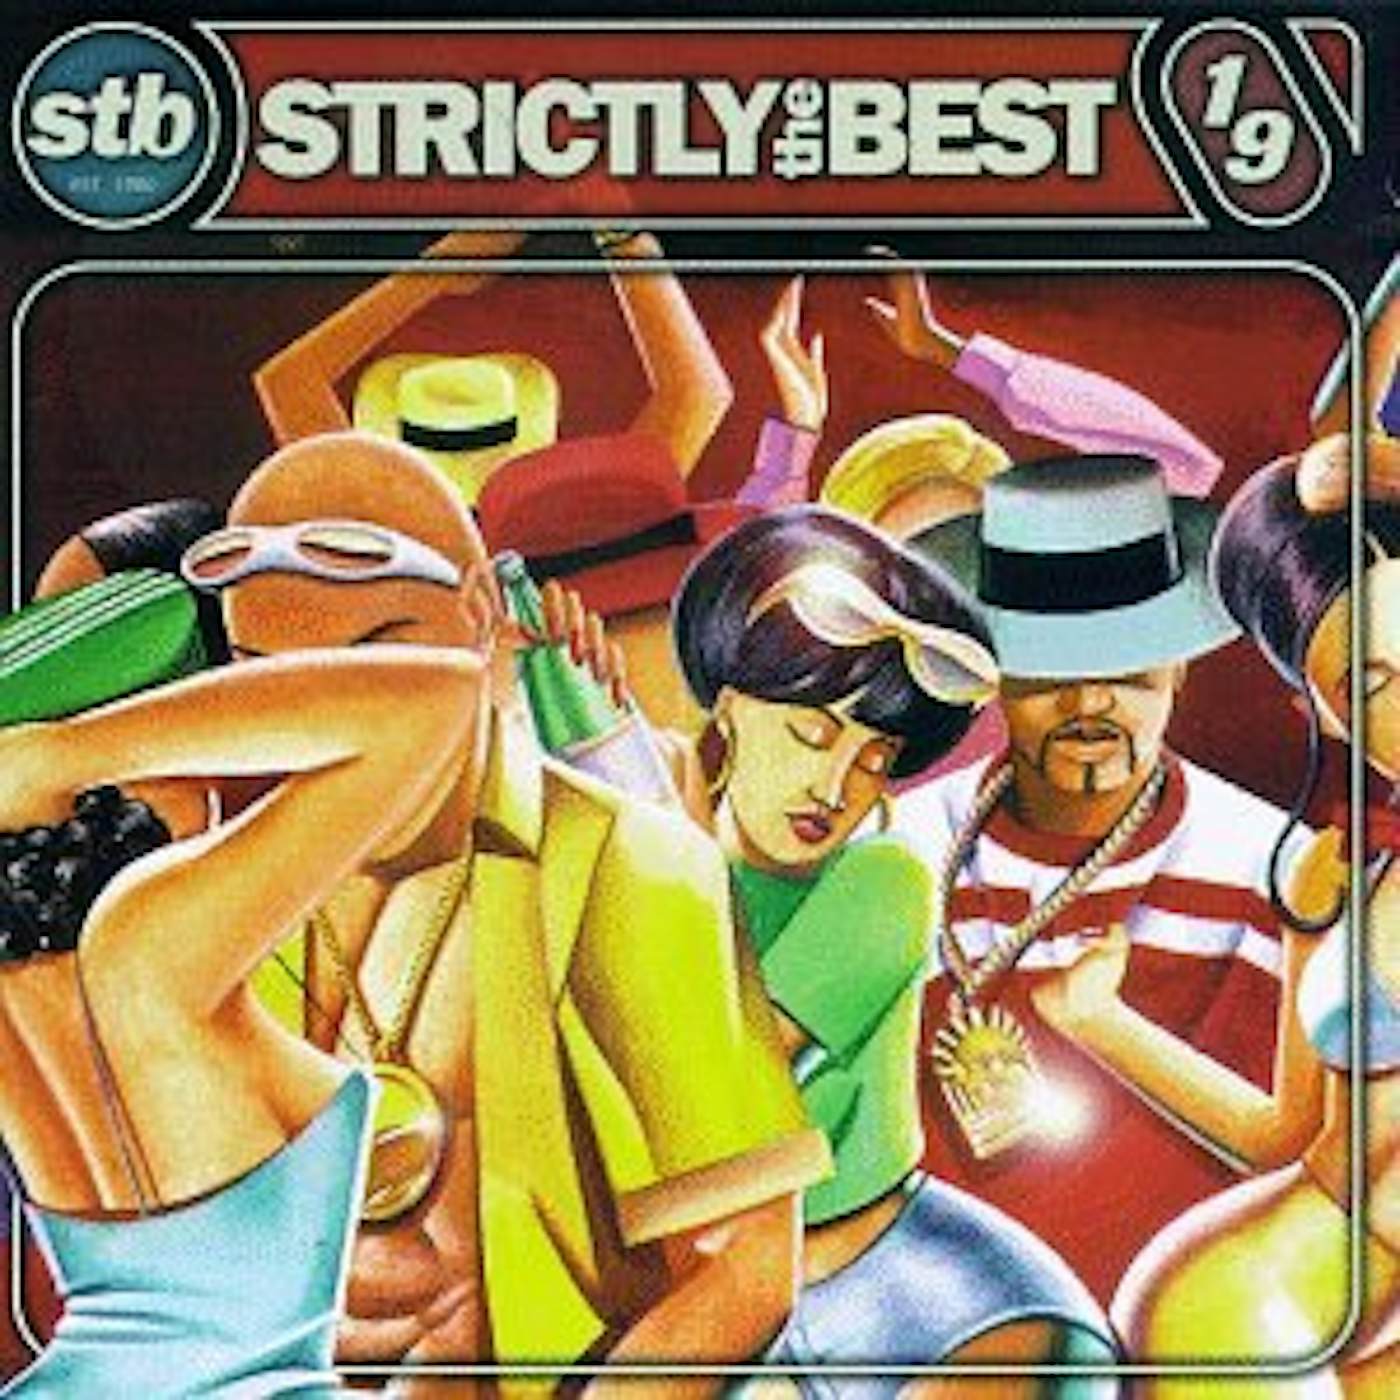 STRICTLY BEST 19 / VARIOUS CD